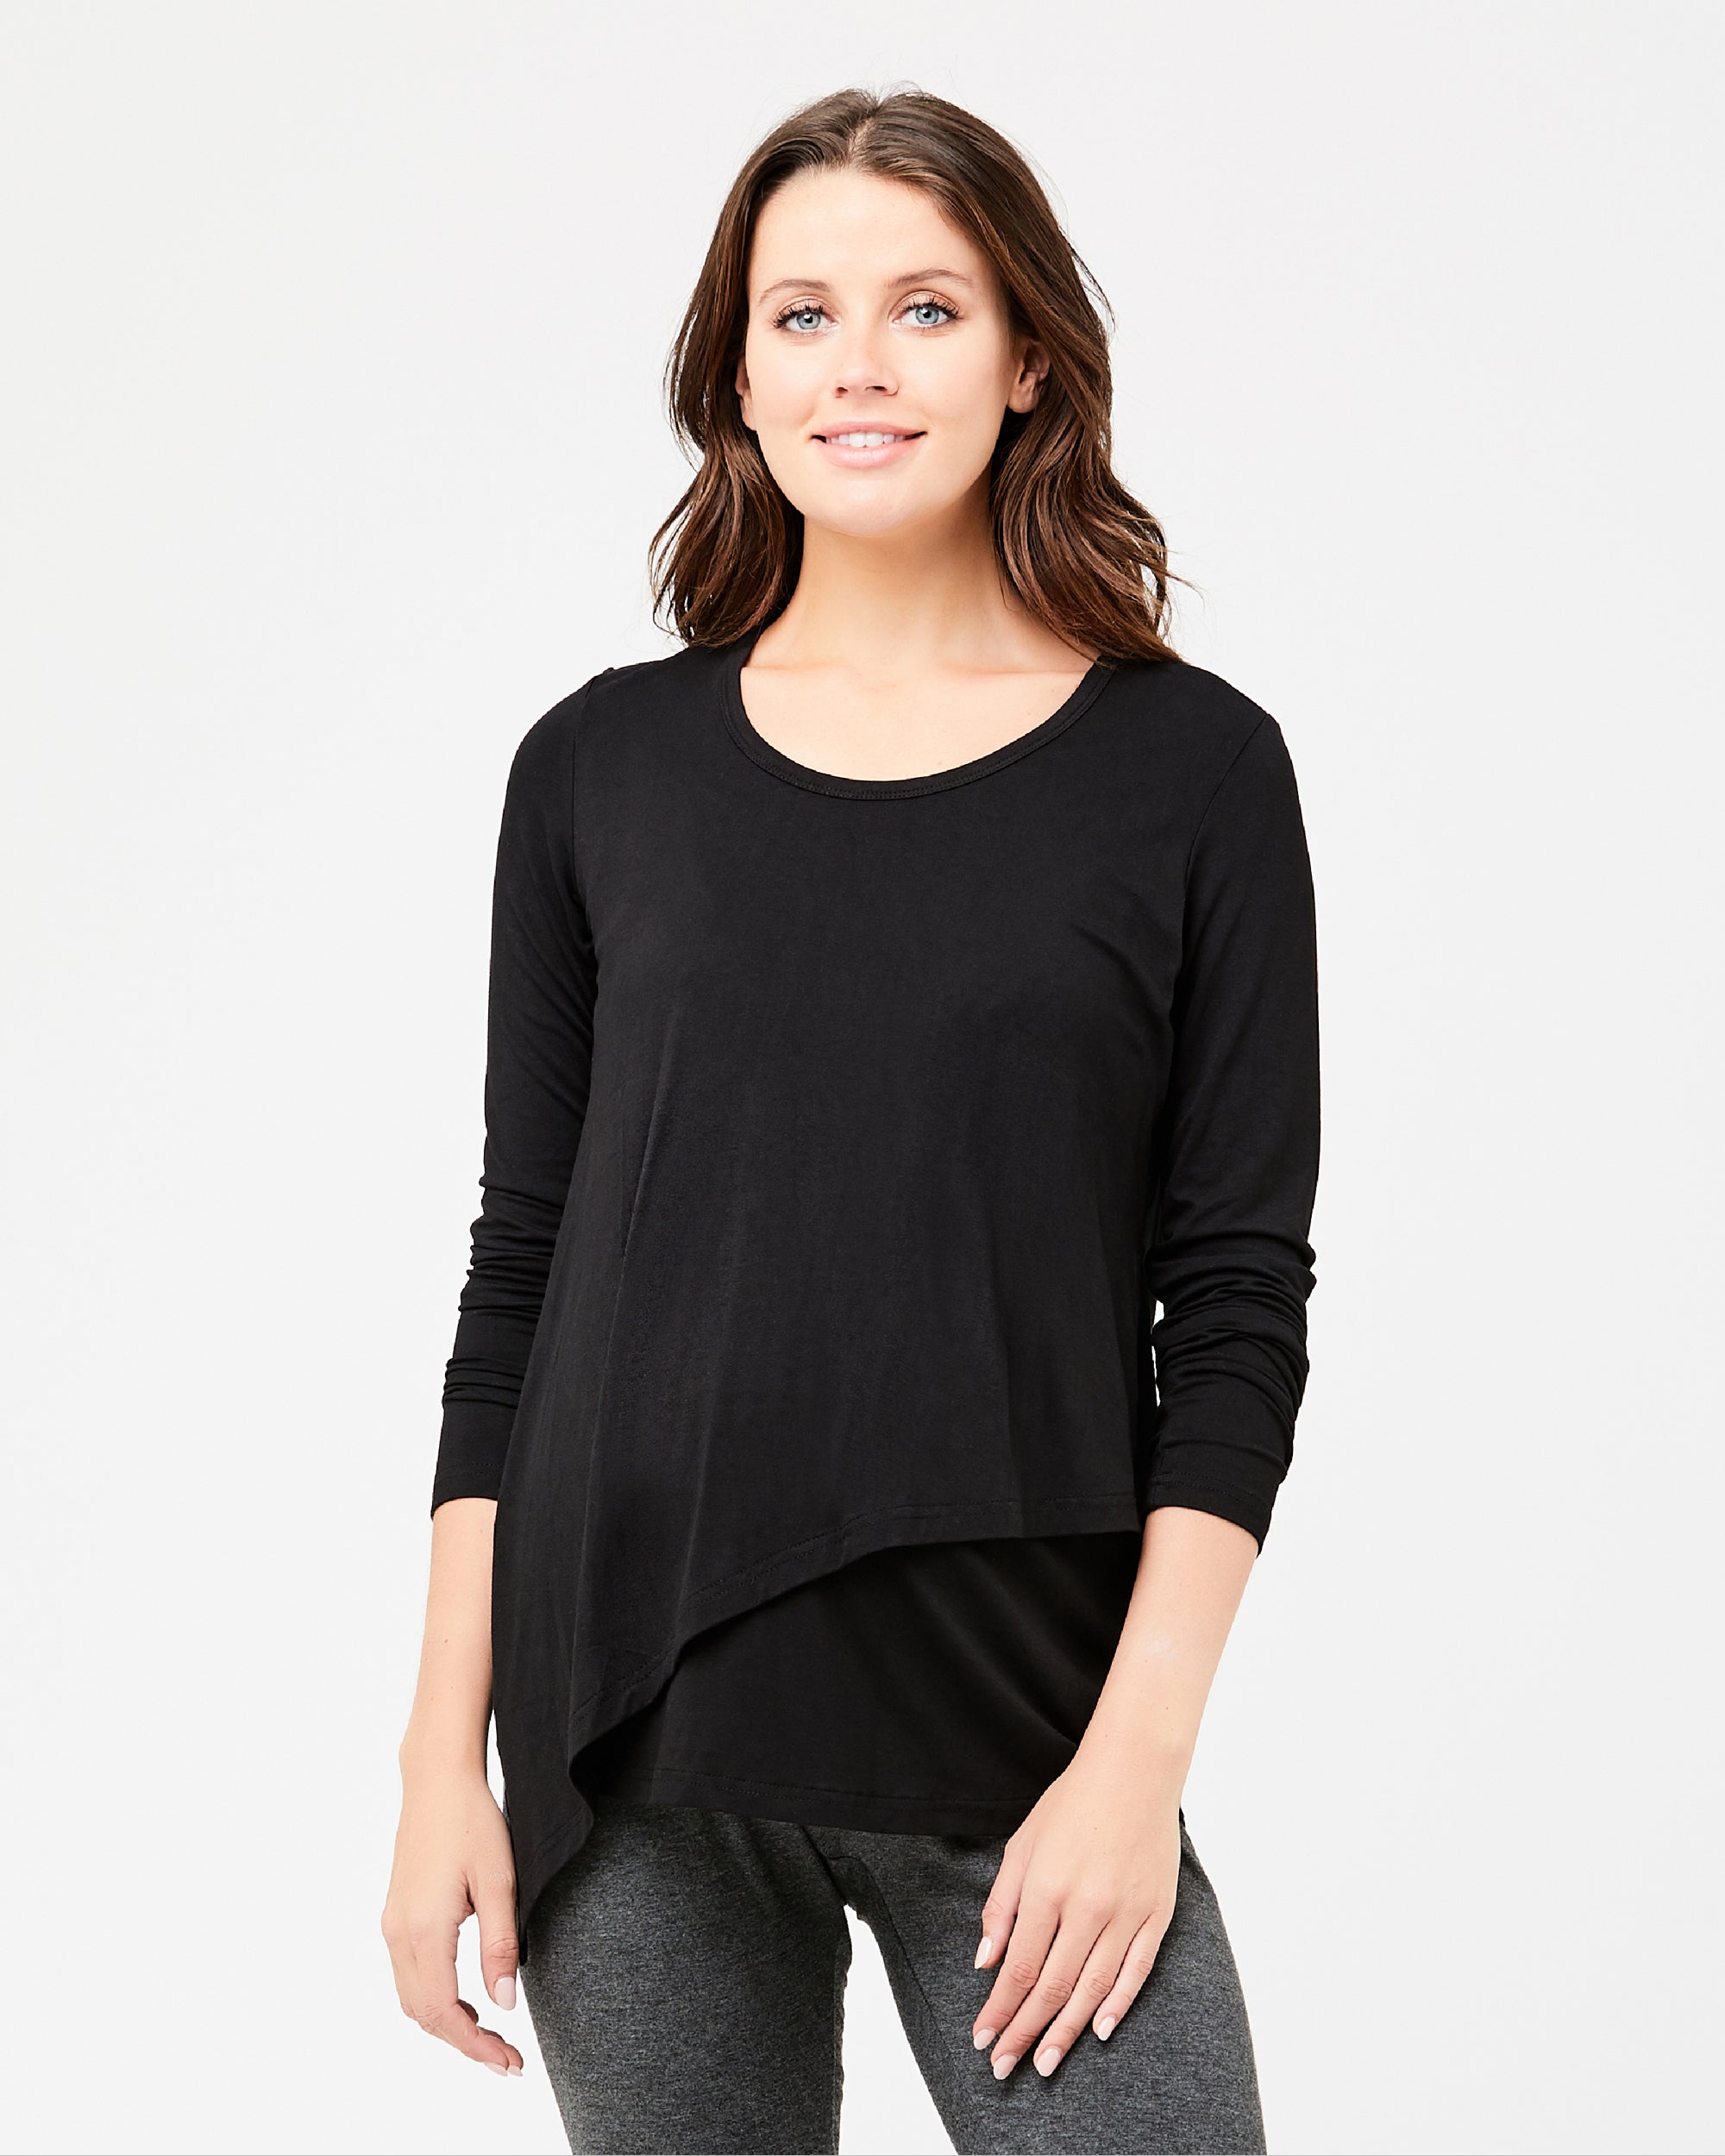 Maternity Tops - Stylish & Comfortable Maternity Tops Australia Wide – Page  3